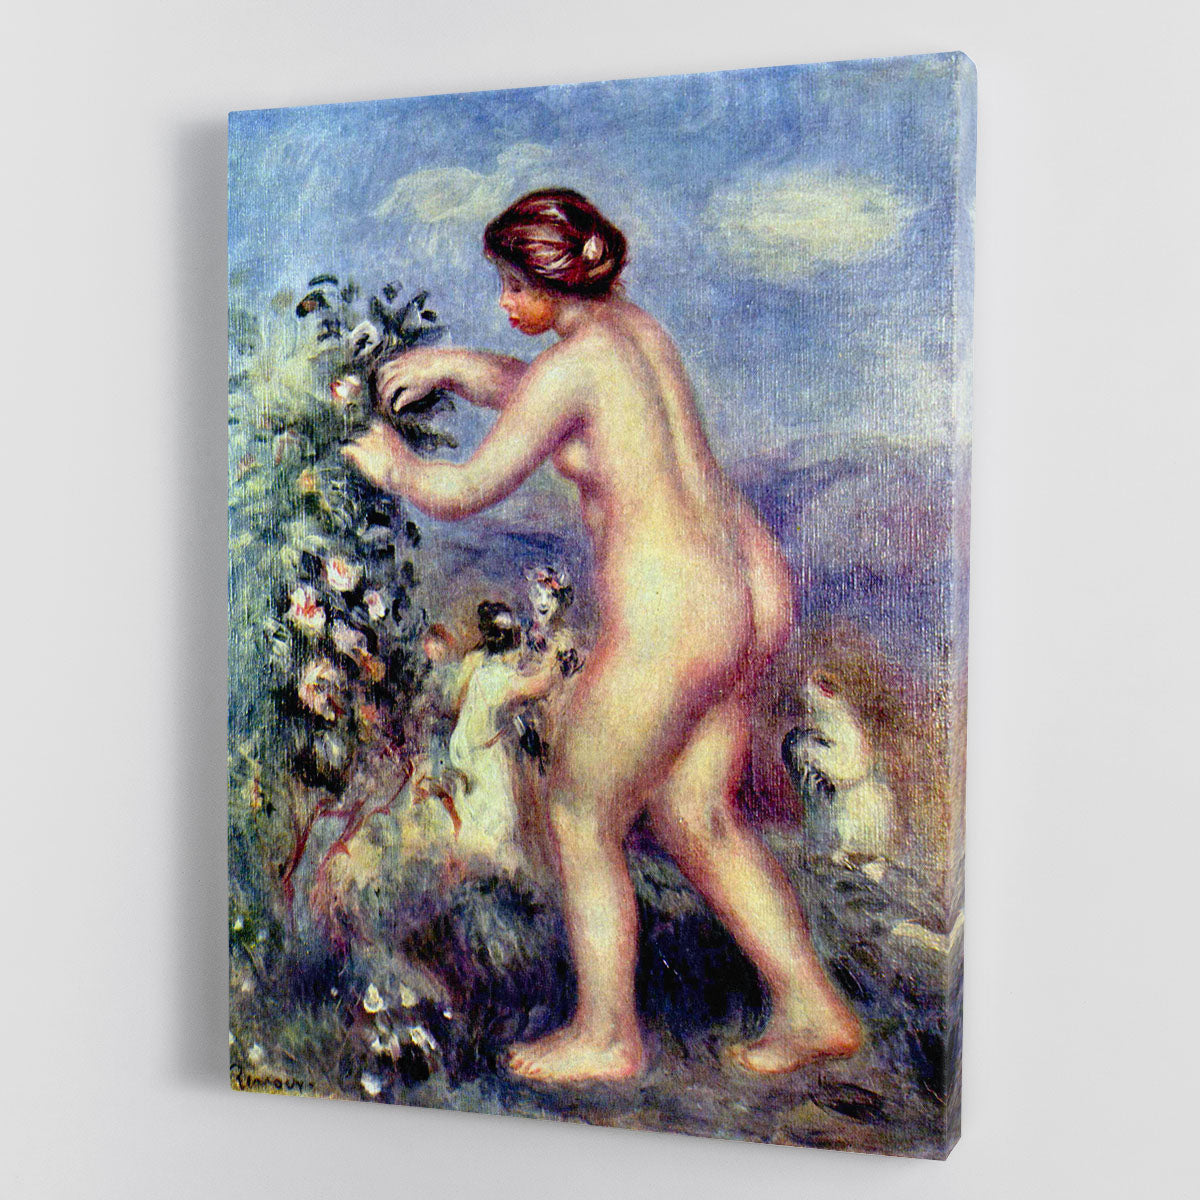 Ode to flower after Anakreon by Renoir Canvas Print or Poster - Canvas Art Rocks - 1